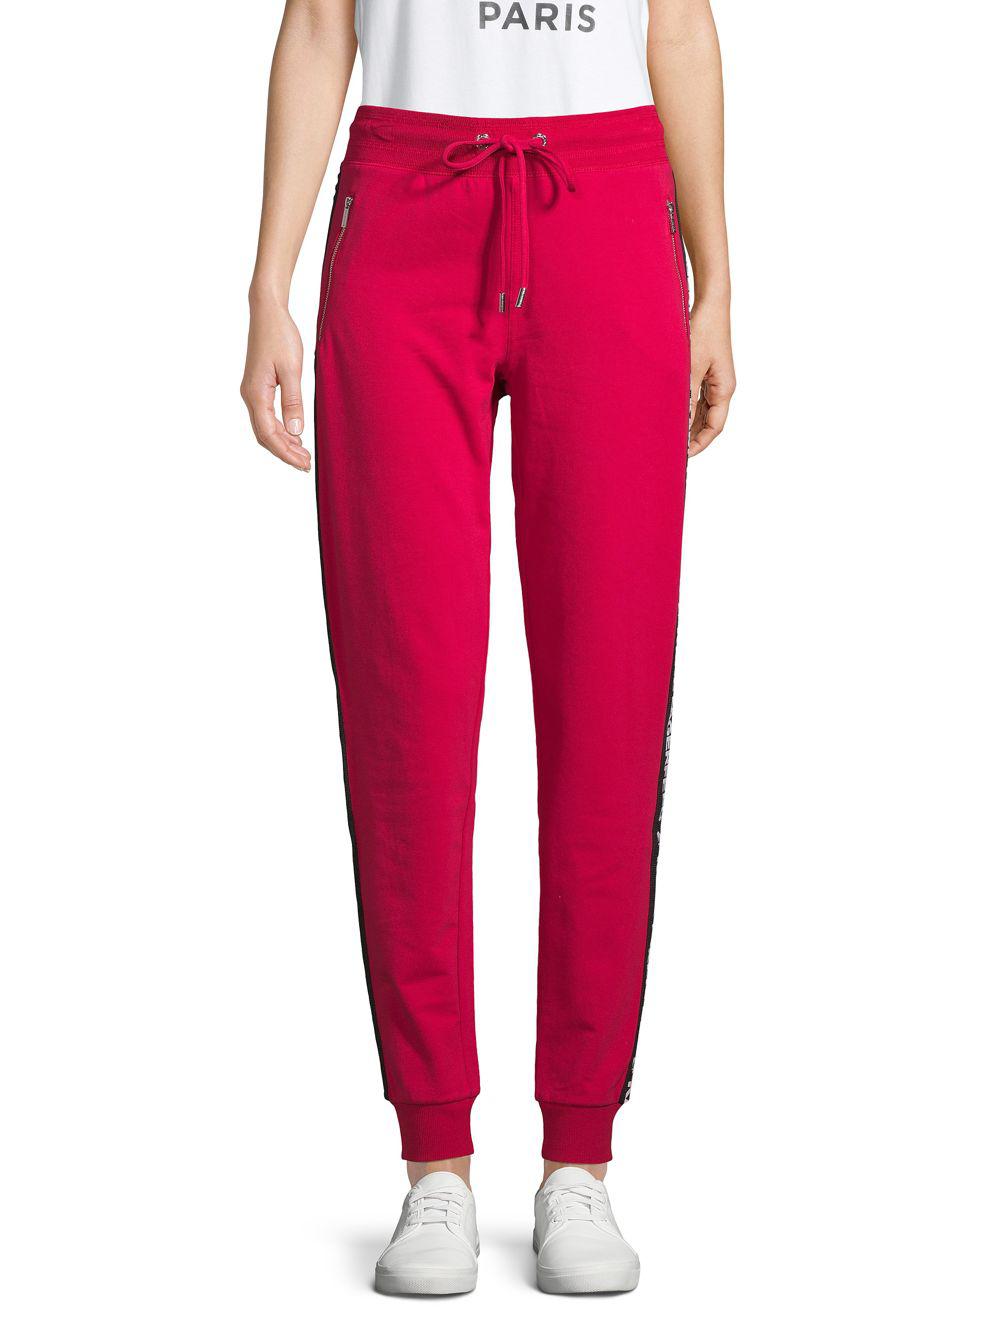 Karl Lagerfeld Cotton Logo Jogger Pants in Cherry (Red) - Lyst